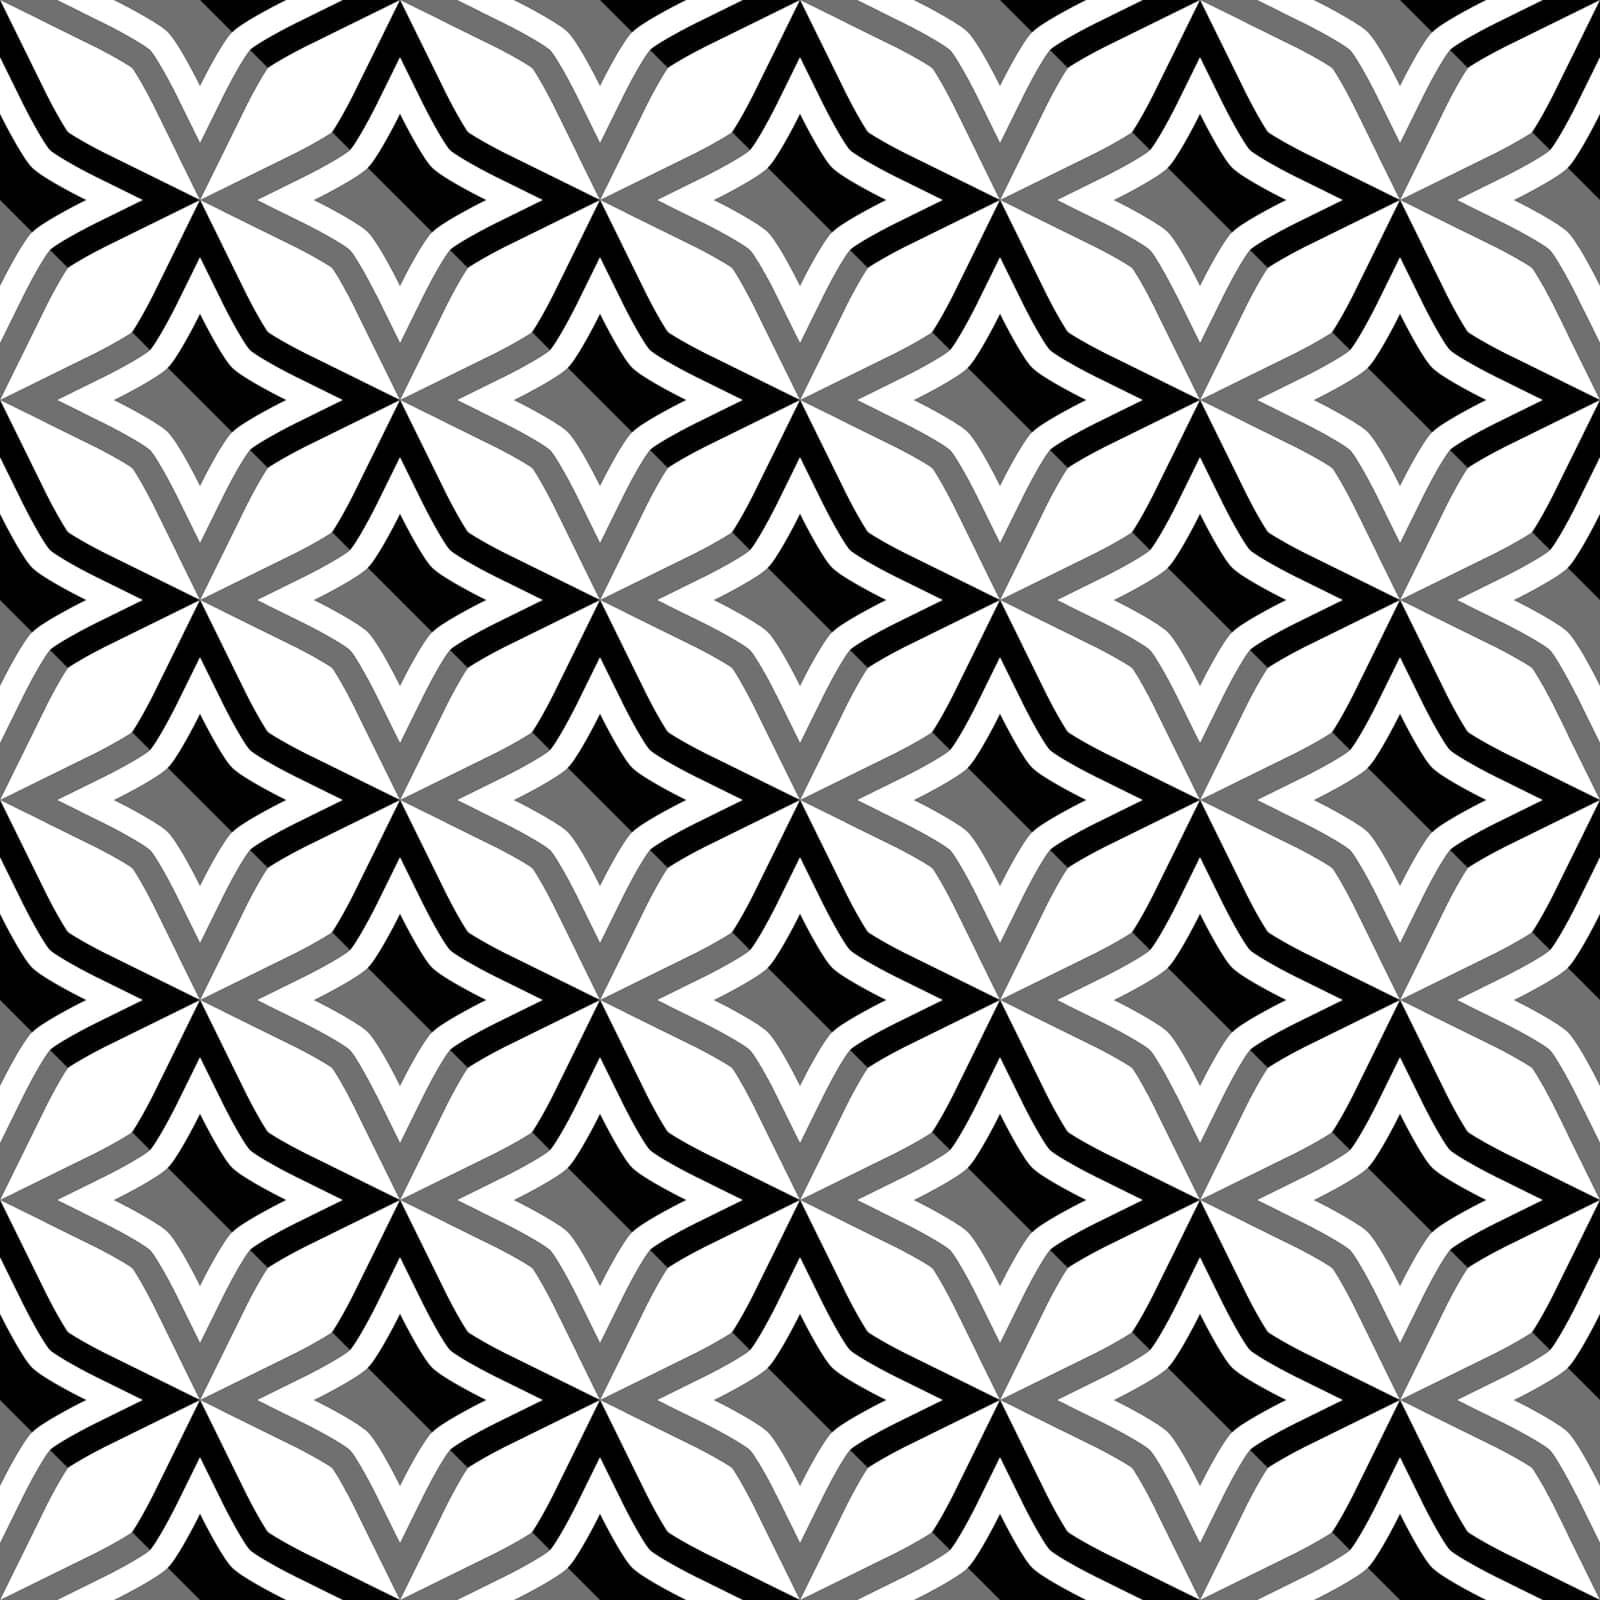 Abstract seamless pattern. Black quadrilateral on white background. Vector illustration.